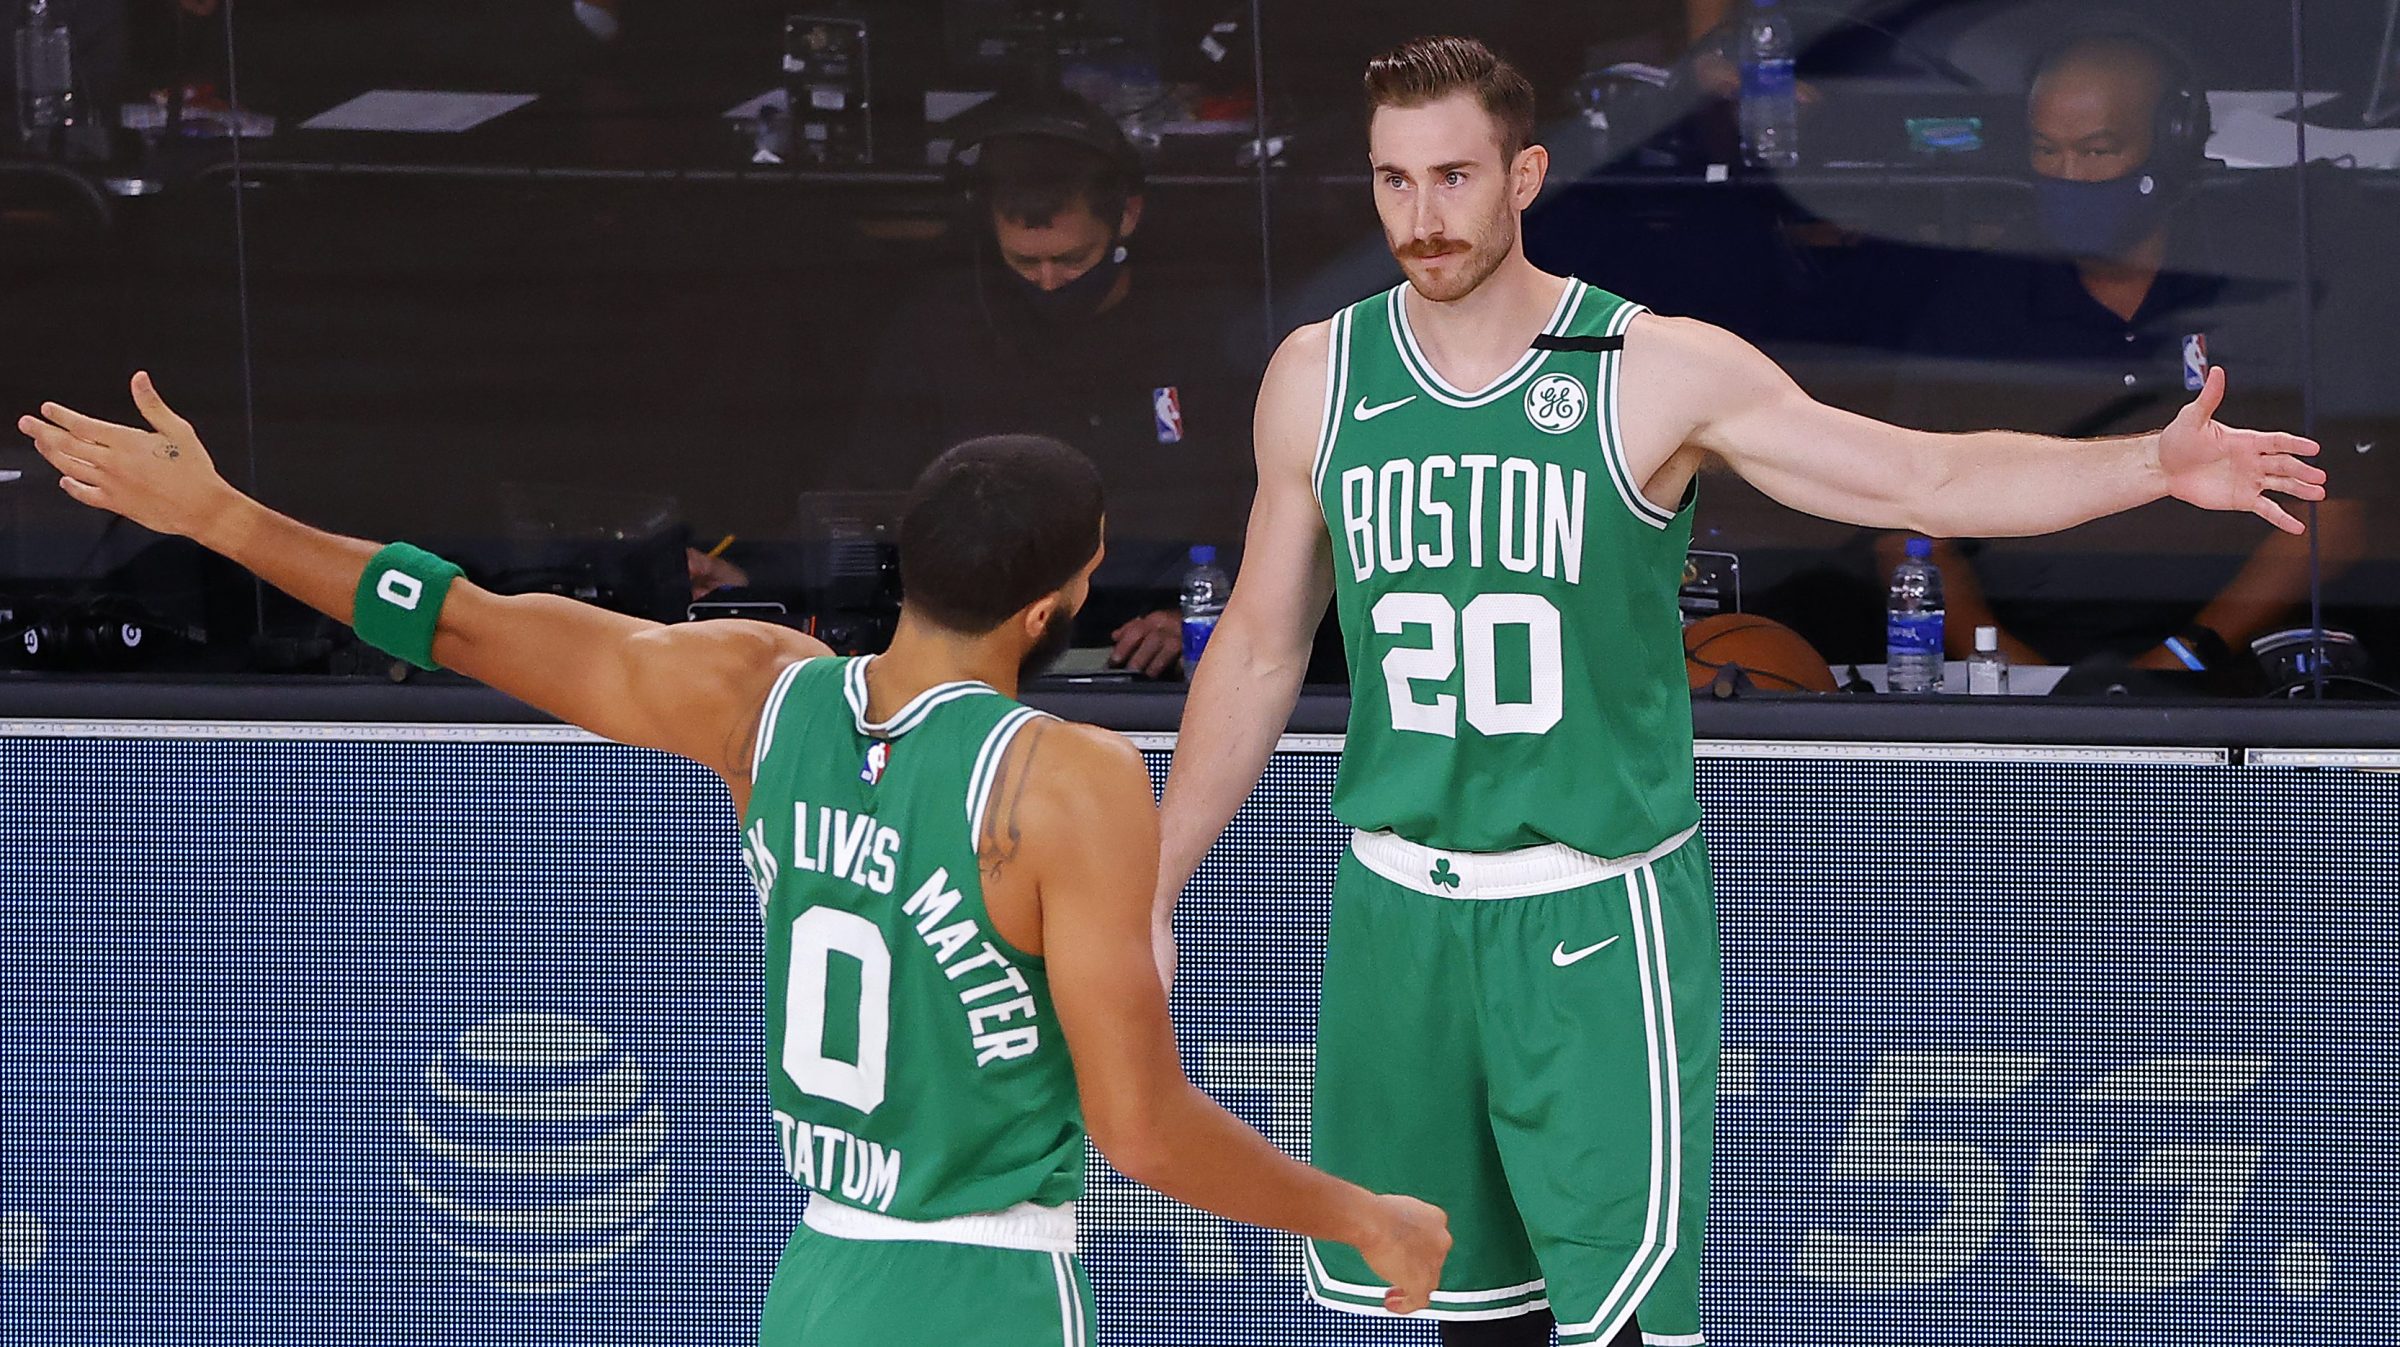 Gordon Hayward and Jayson Tatum greet each other on the sideline of a Celtics playoff game.